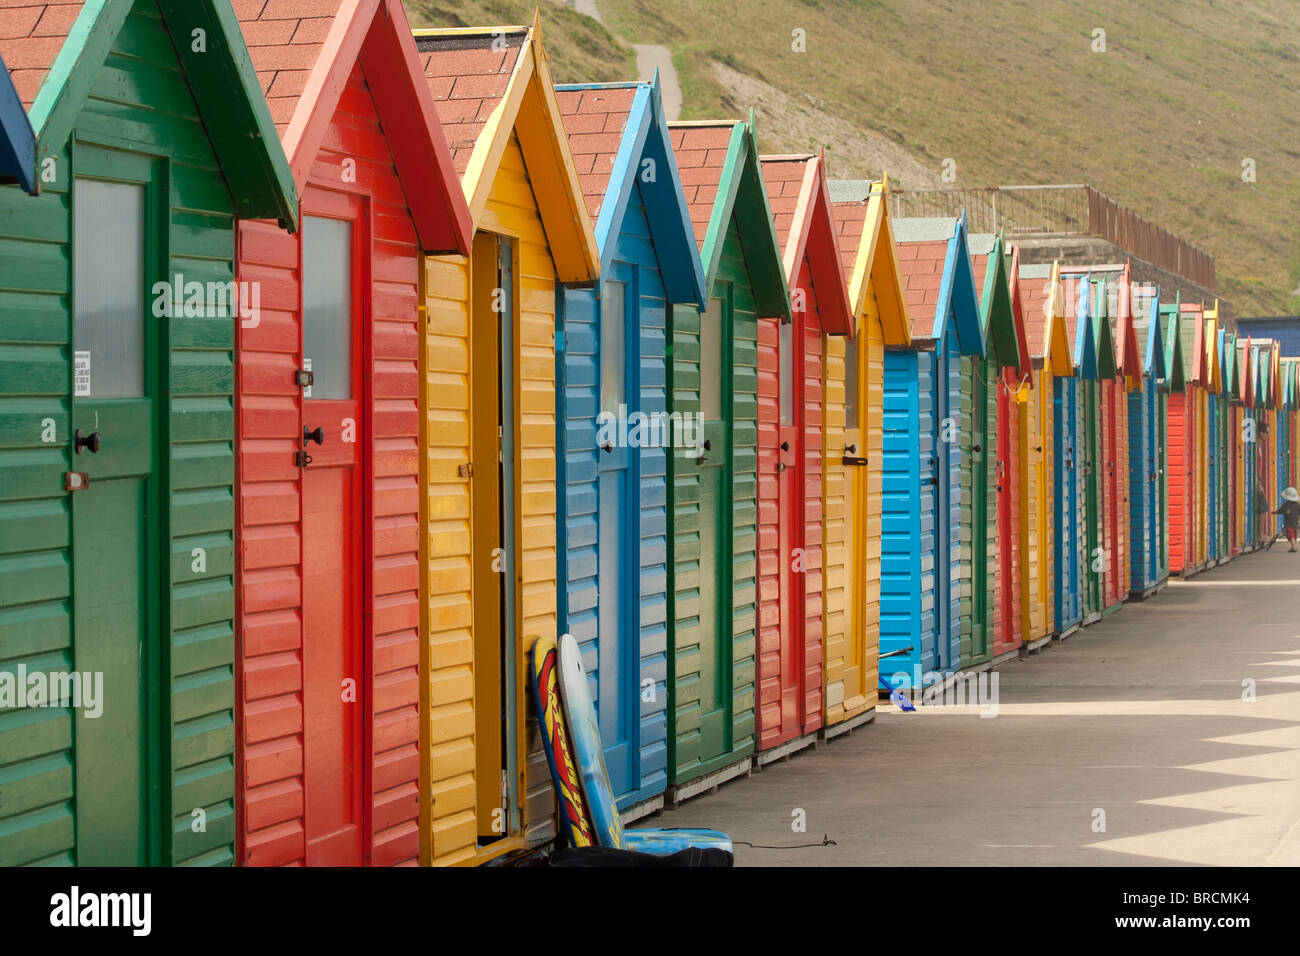 Typically British brightly colored row of beach huts  at English seaside resort. Stock Photo